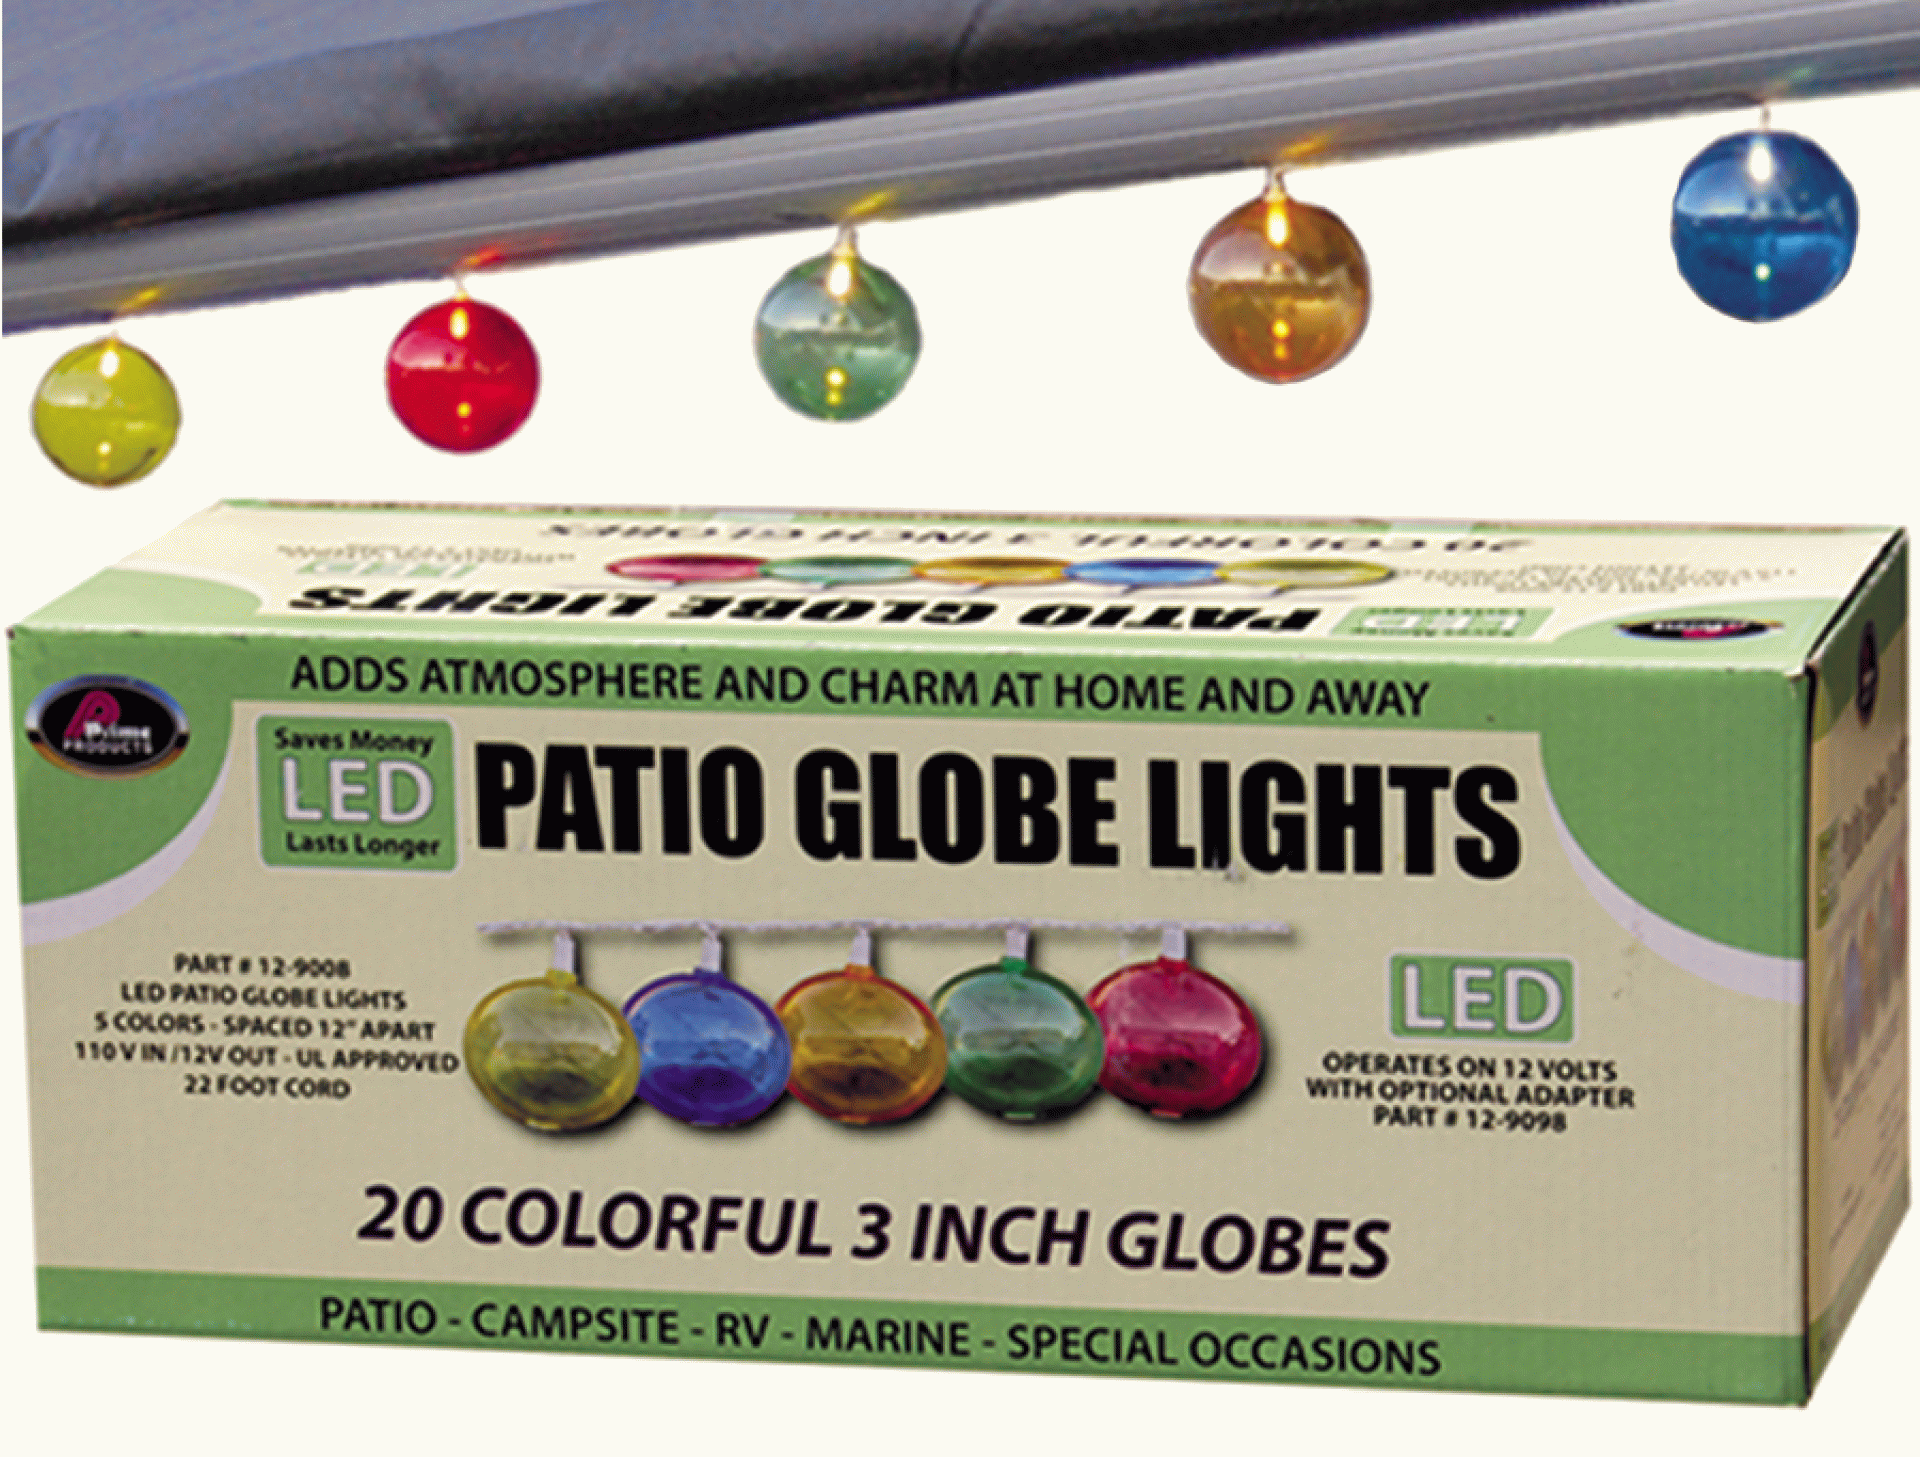 PRIME PRODUCTS | 12-9008 | Lights Patio Multi Color Globes 3.25" Diameter 22' Cord